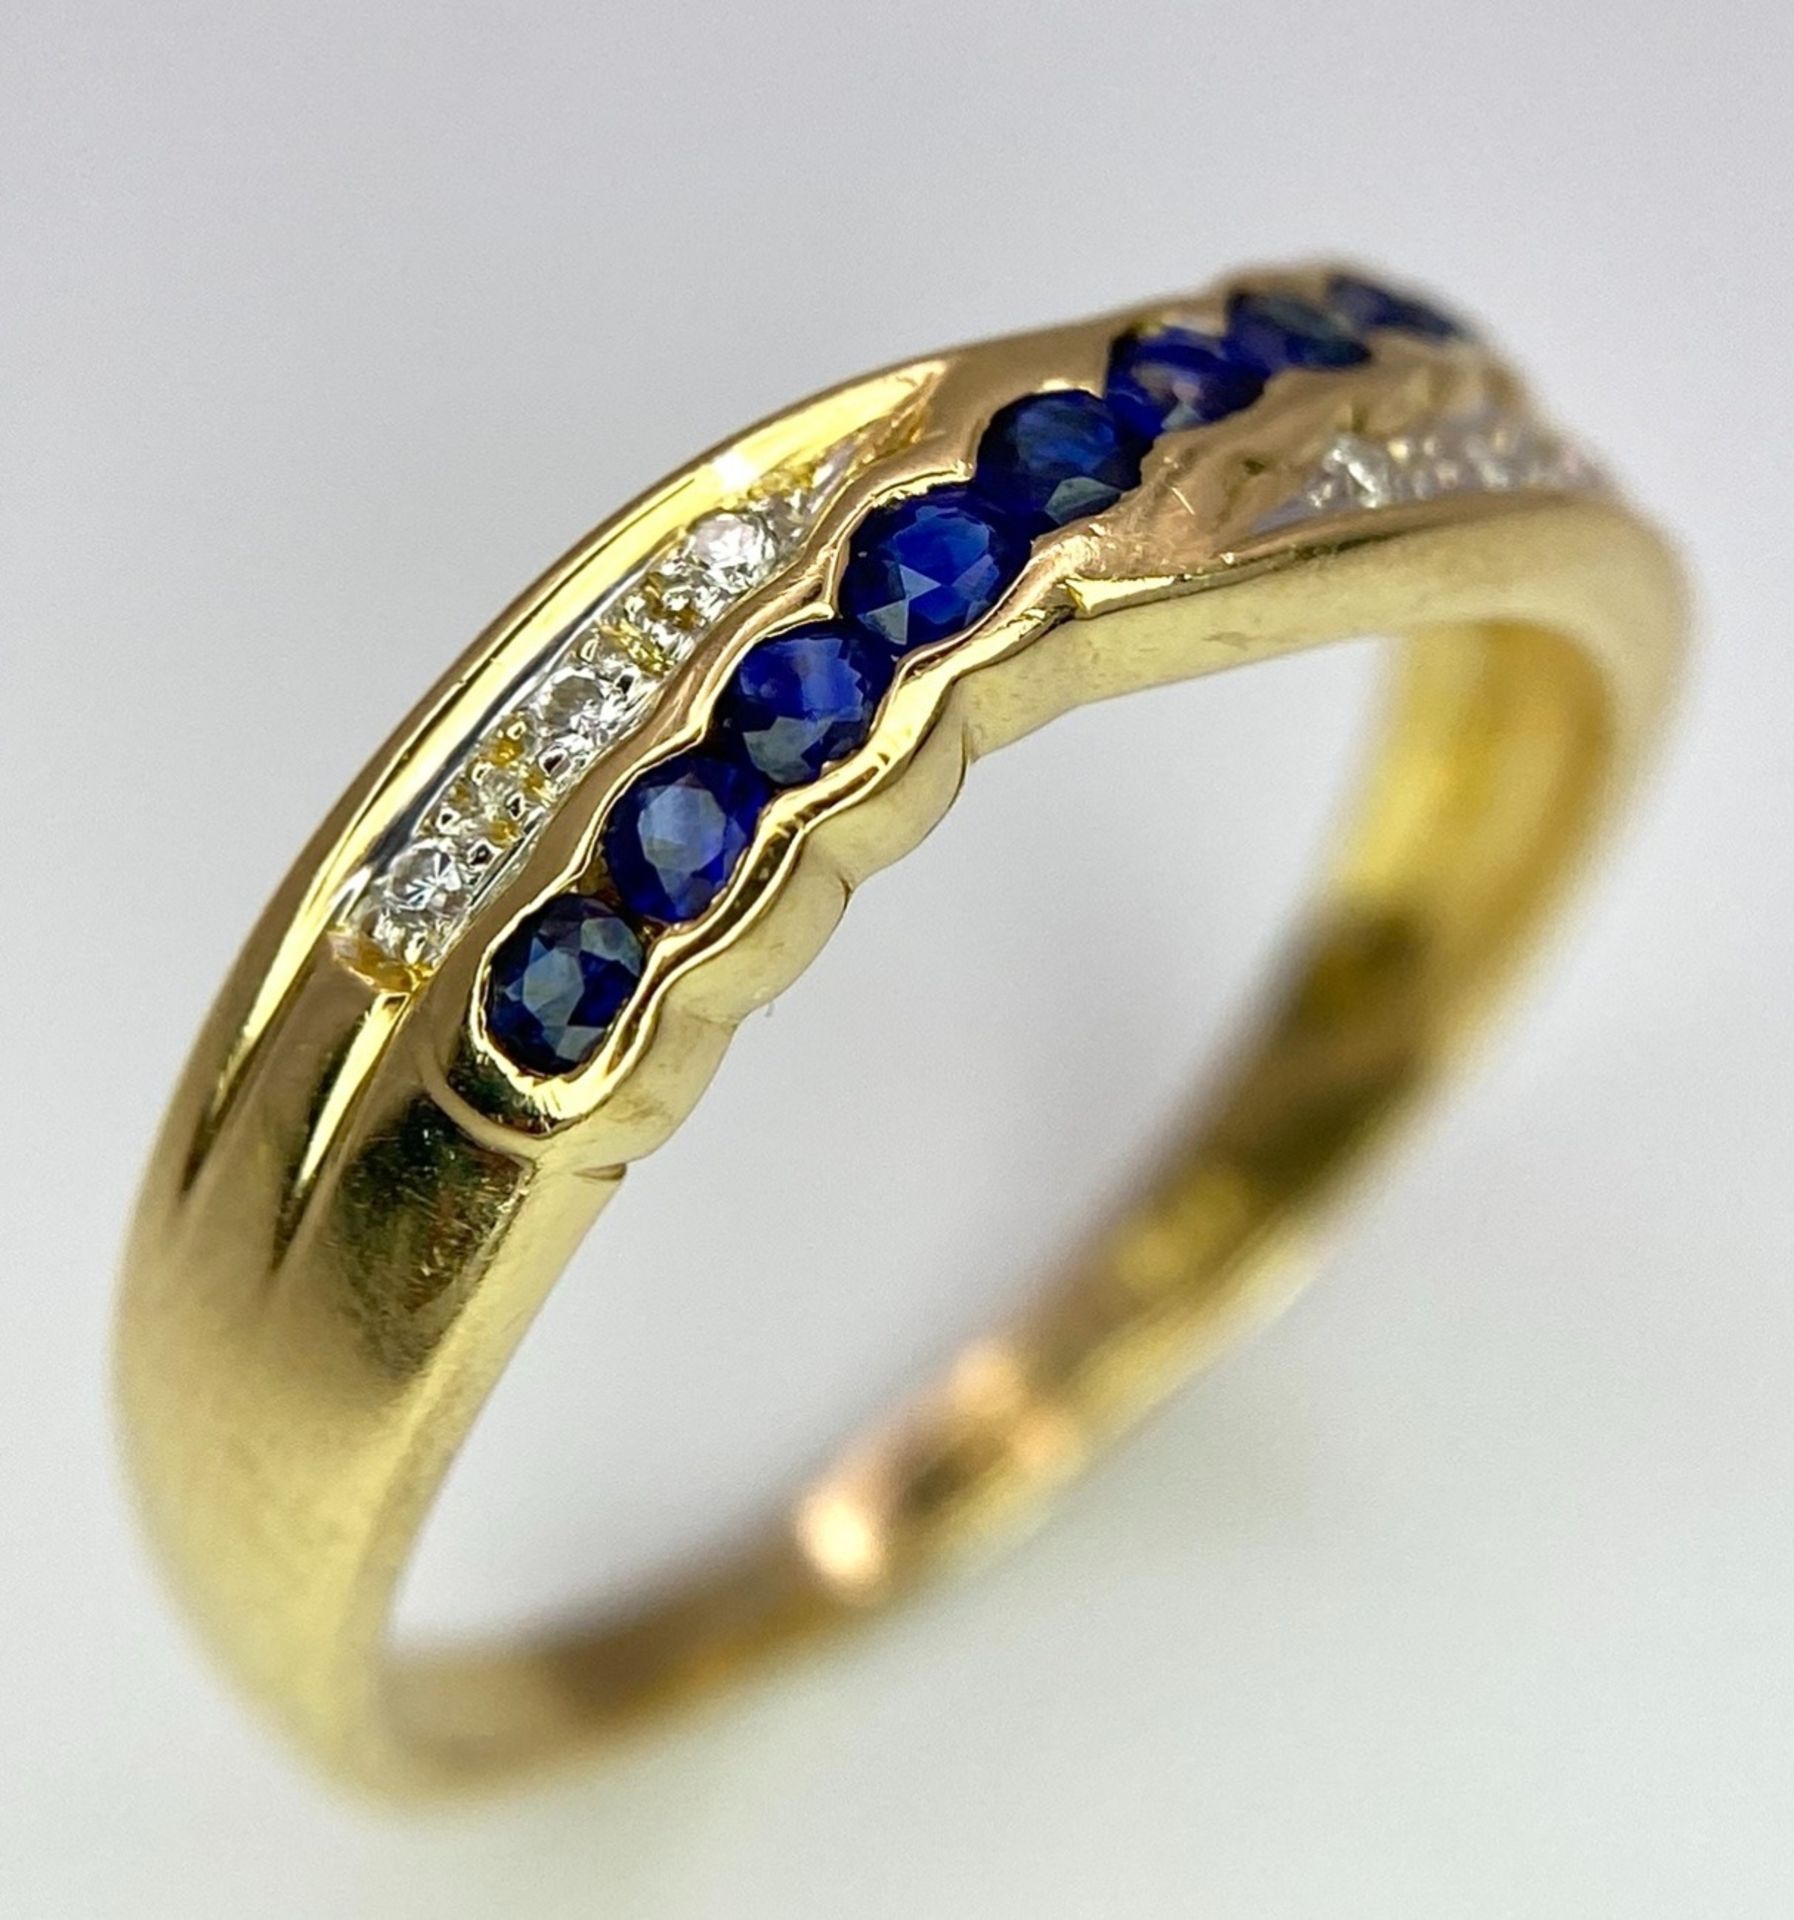 AN 18K YELLOW GOLD DIAMOND & BLUE STONE (PROBABLY SAPPHIRE) CROSSOVER RING. Size O, 2.7g total - Image 5 of 6